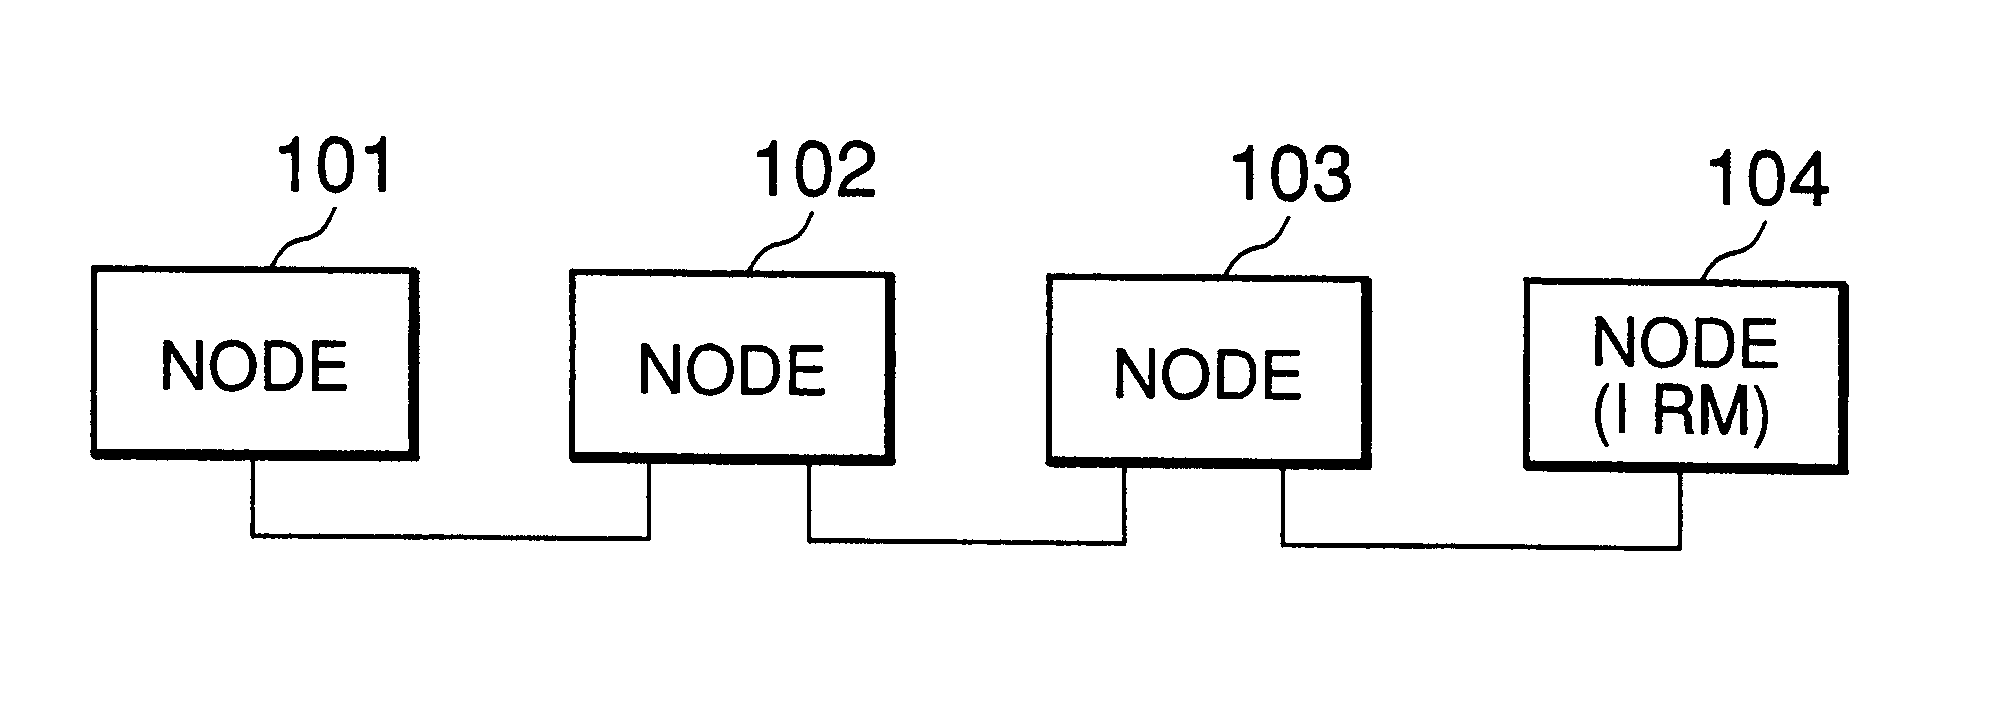 System and method for reliable real-time communications among a plurality of nodes having functions conforming to IEEE-1394 serial bus and participating in a session of sharing the maximum bandwidth